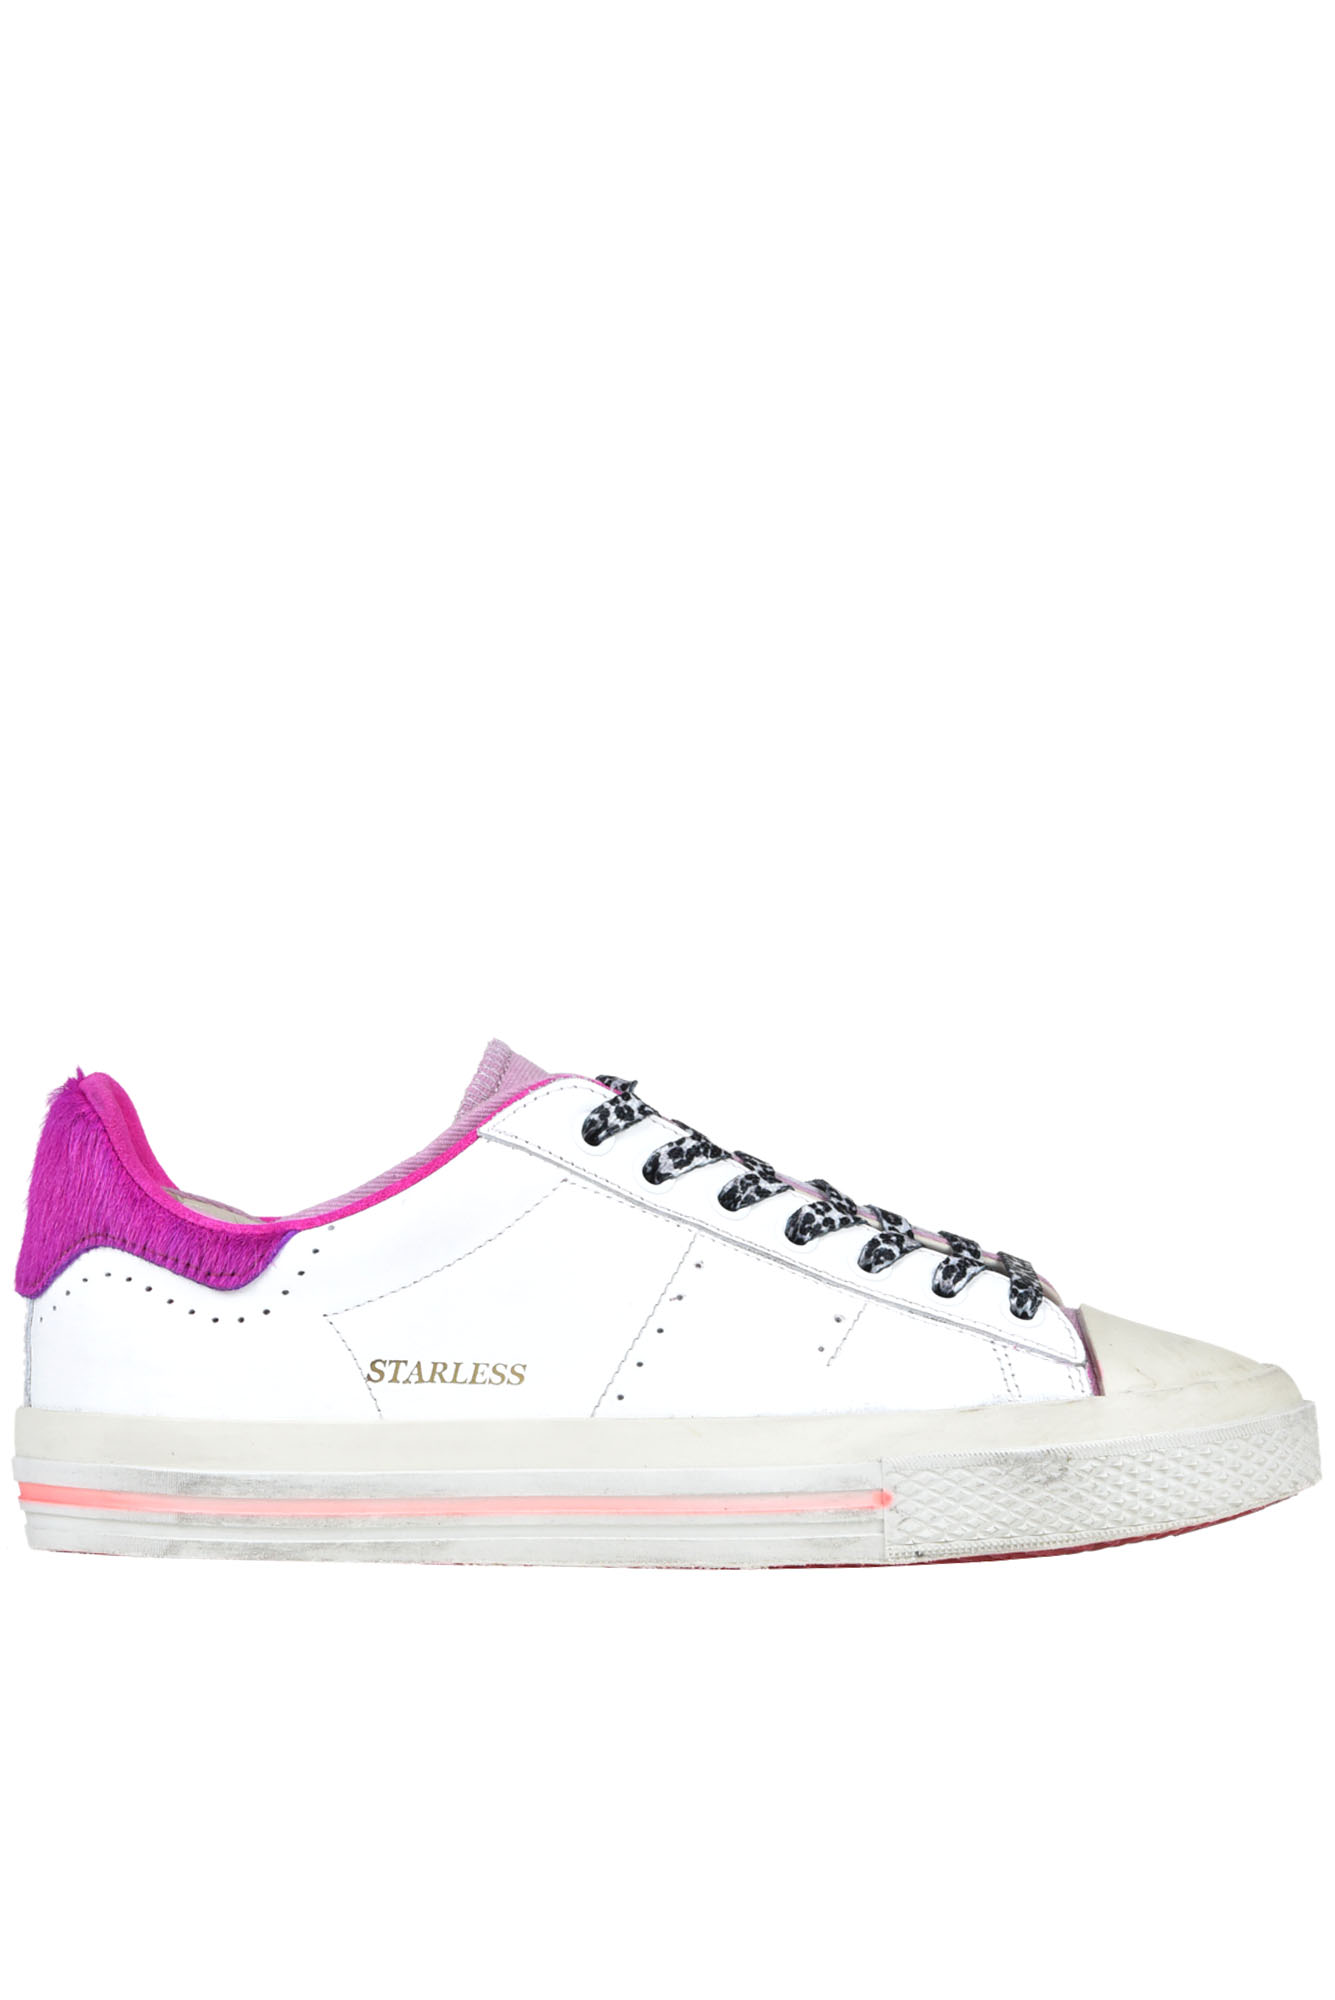 Hidnander Starless Low Used Effect Sneakers In White